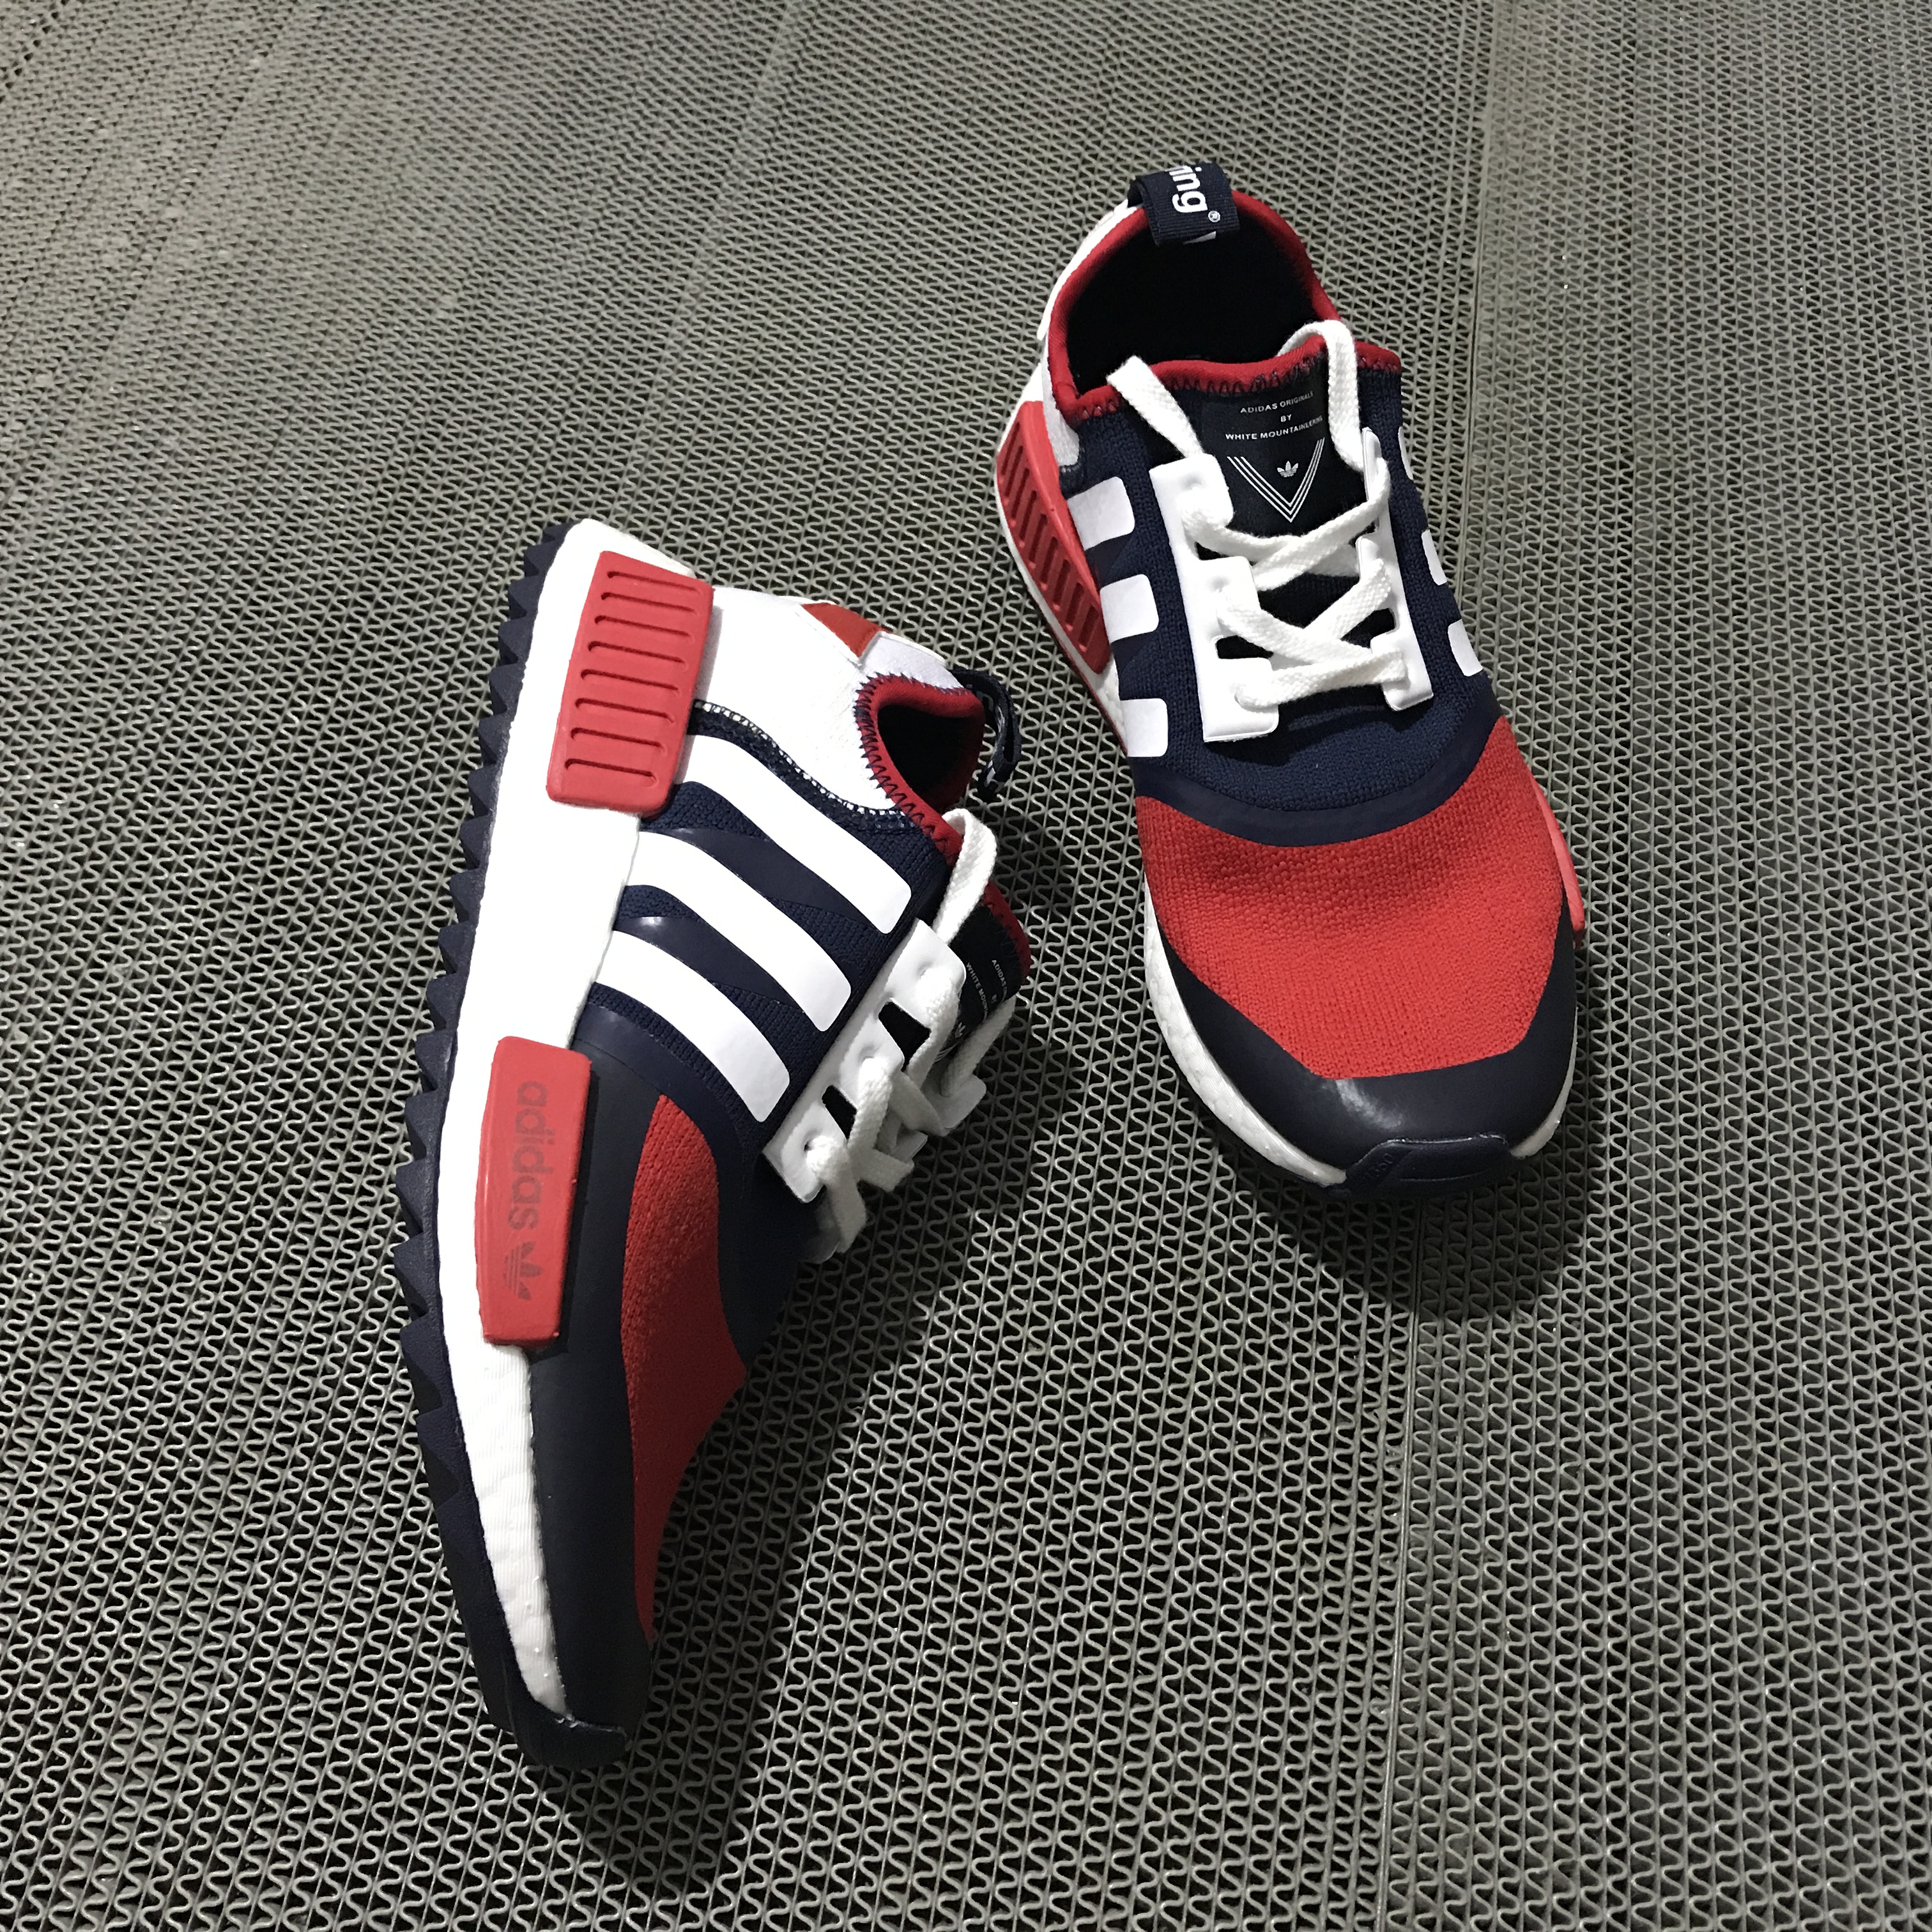 stilhed midler bunke White Mountaineering x adidas NMD Trail PK Navy/Red/White For Sale – The  Sole Line